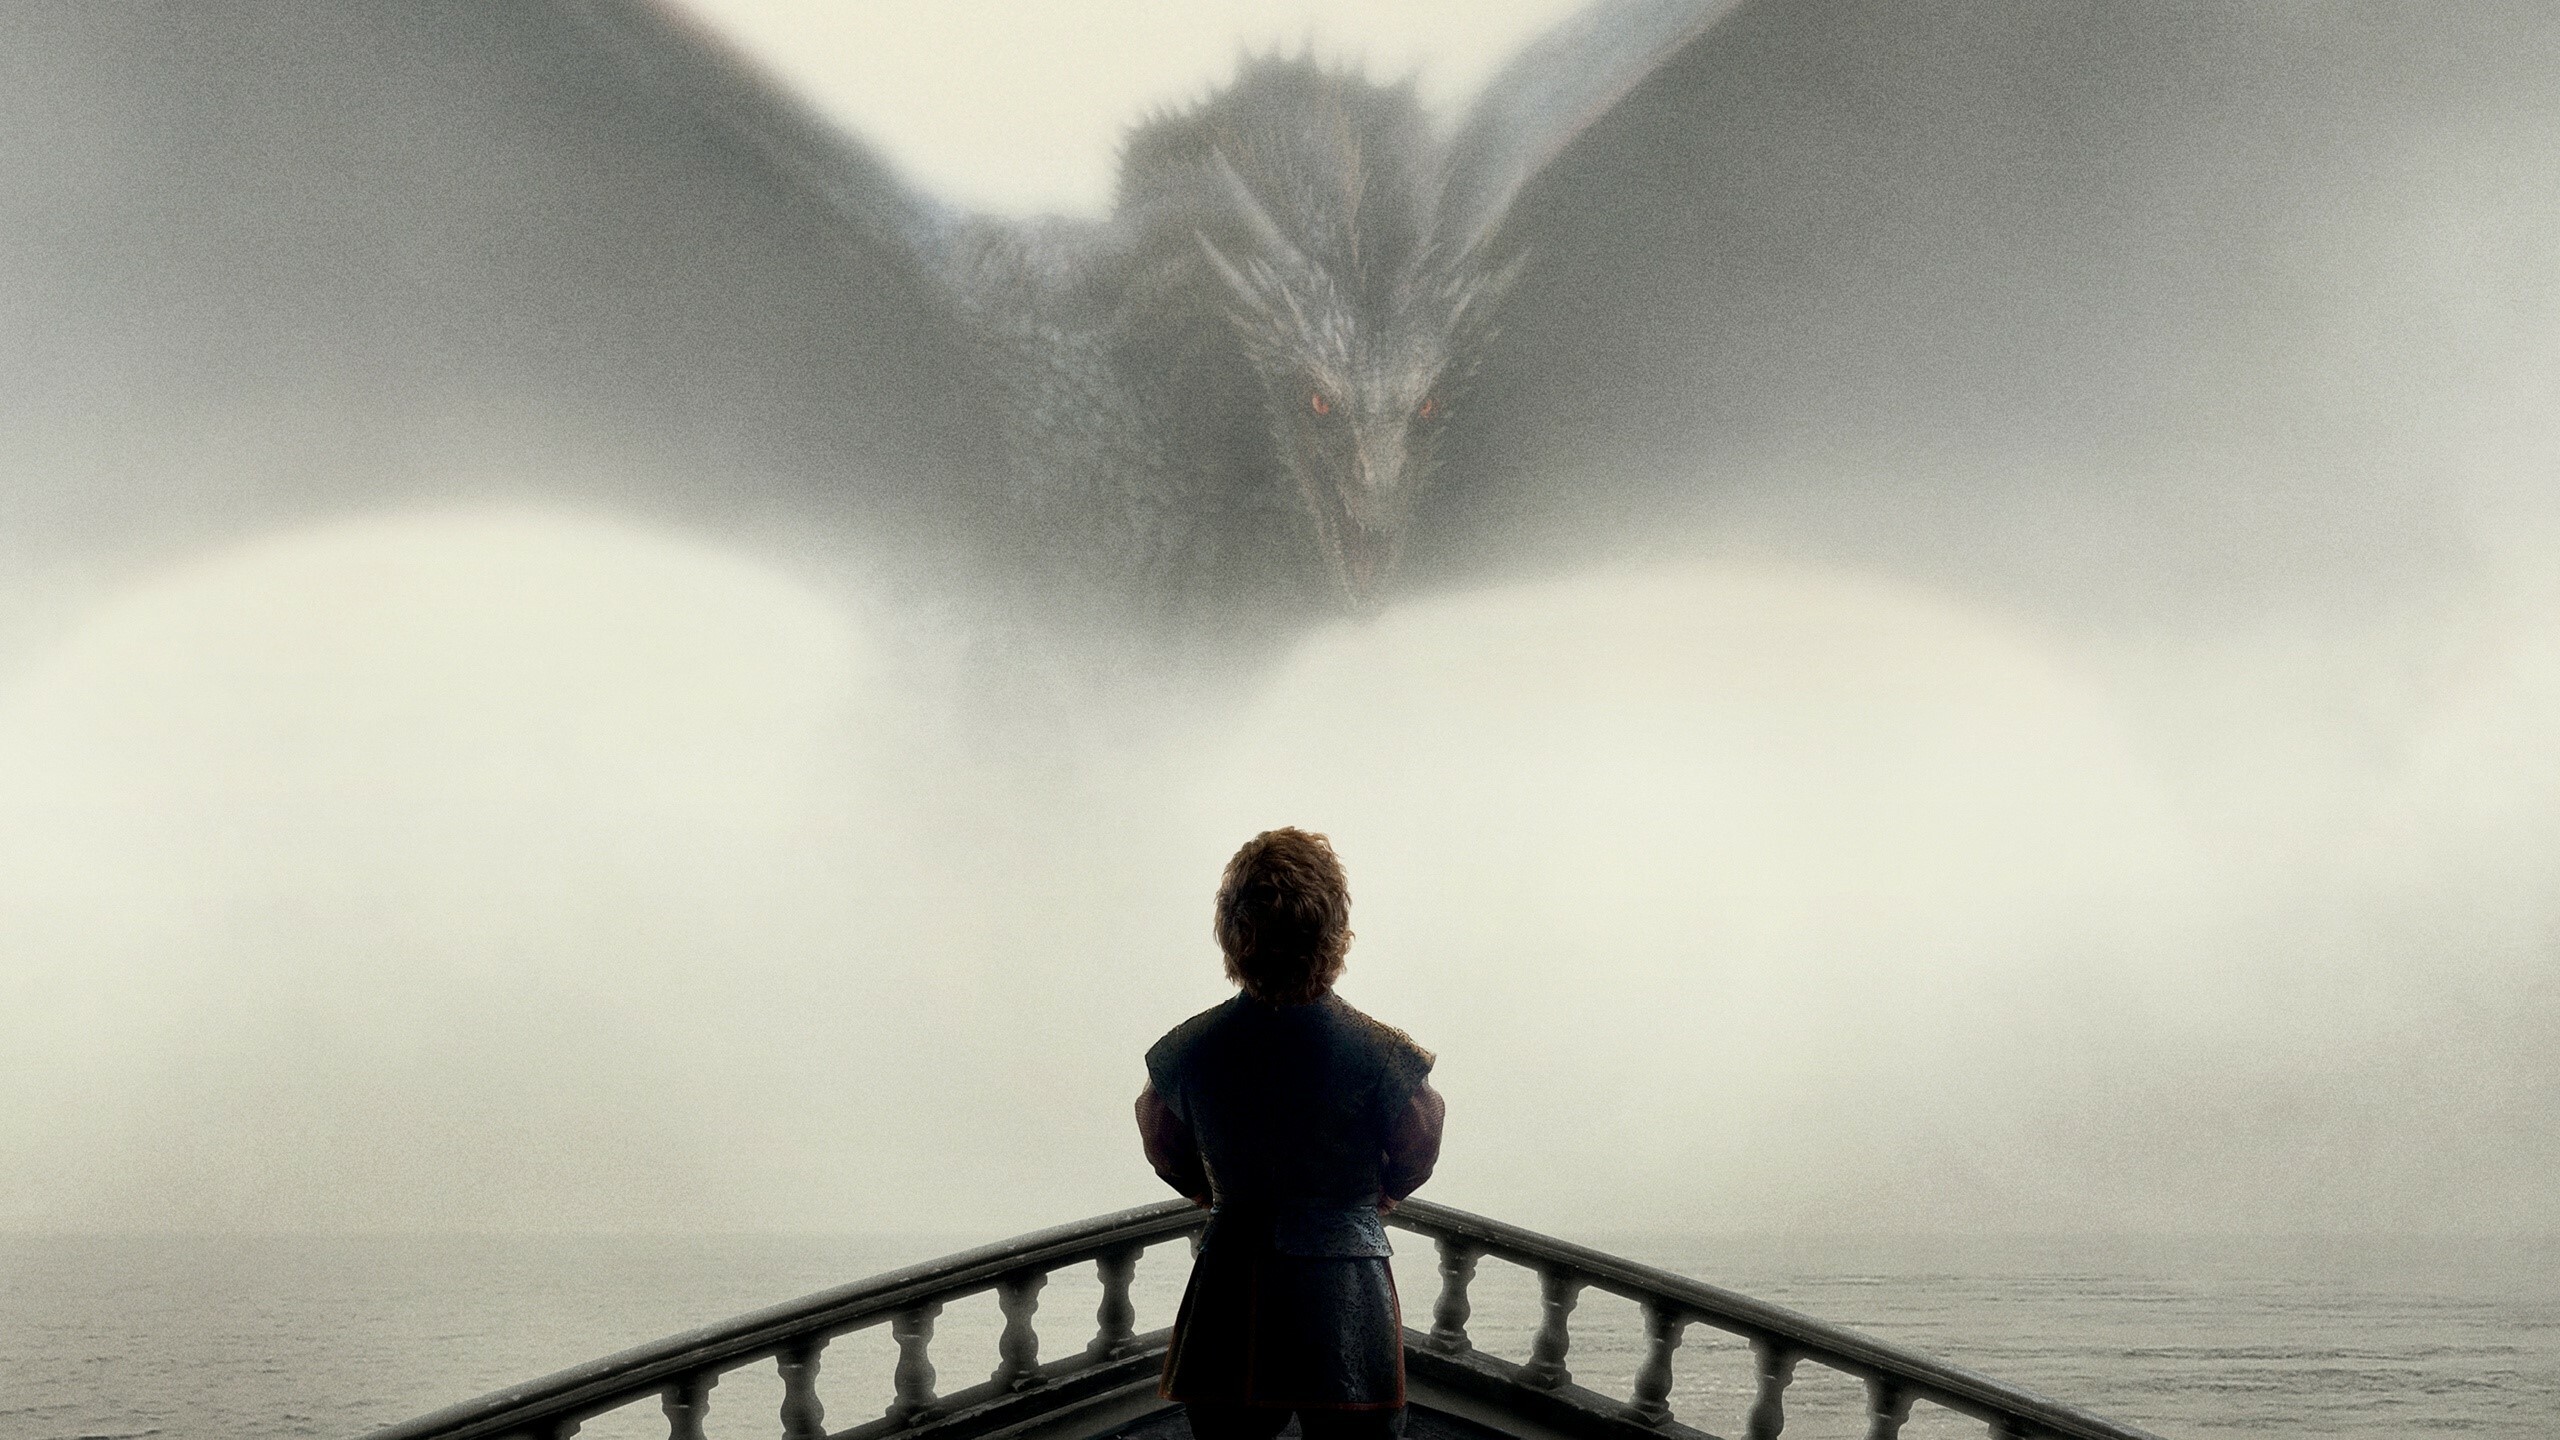 Game of Thrones: Tyrion Lannister, portrayed by American actor Peter Dinklage, Drogon. 2560x1440 HD Wallpaper.